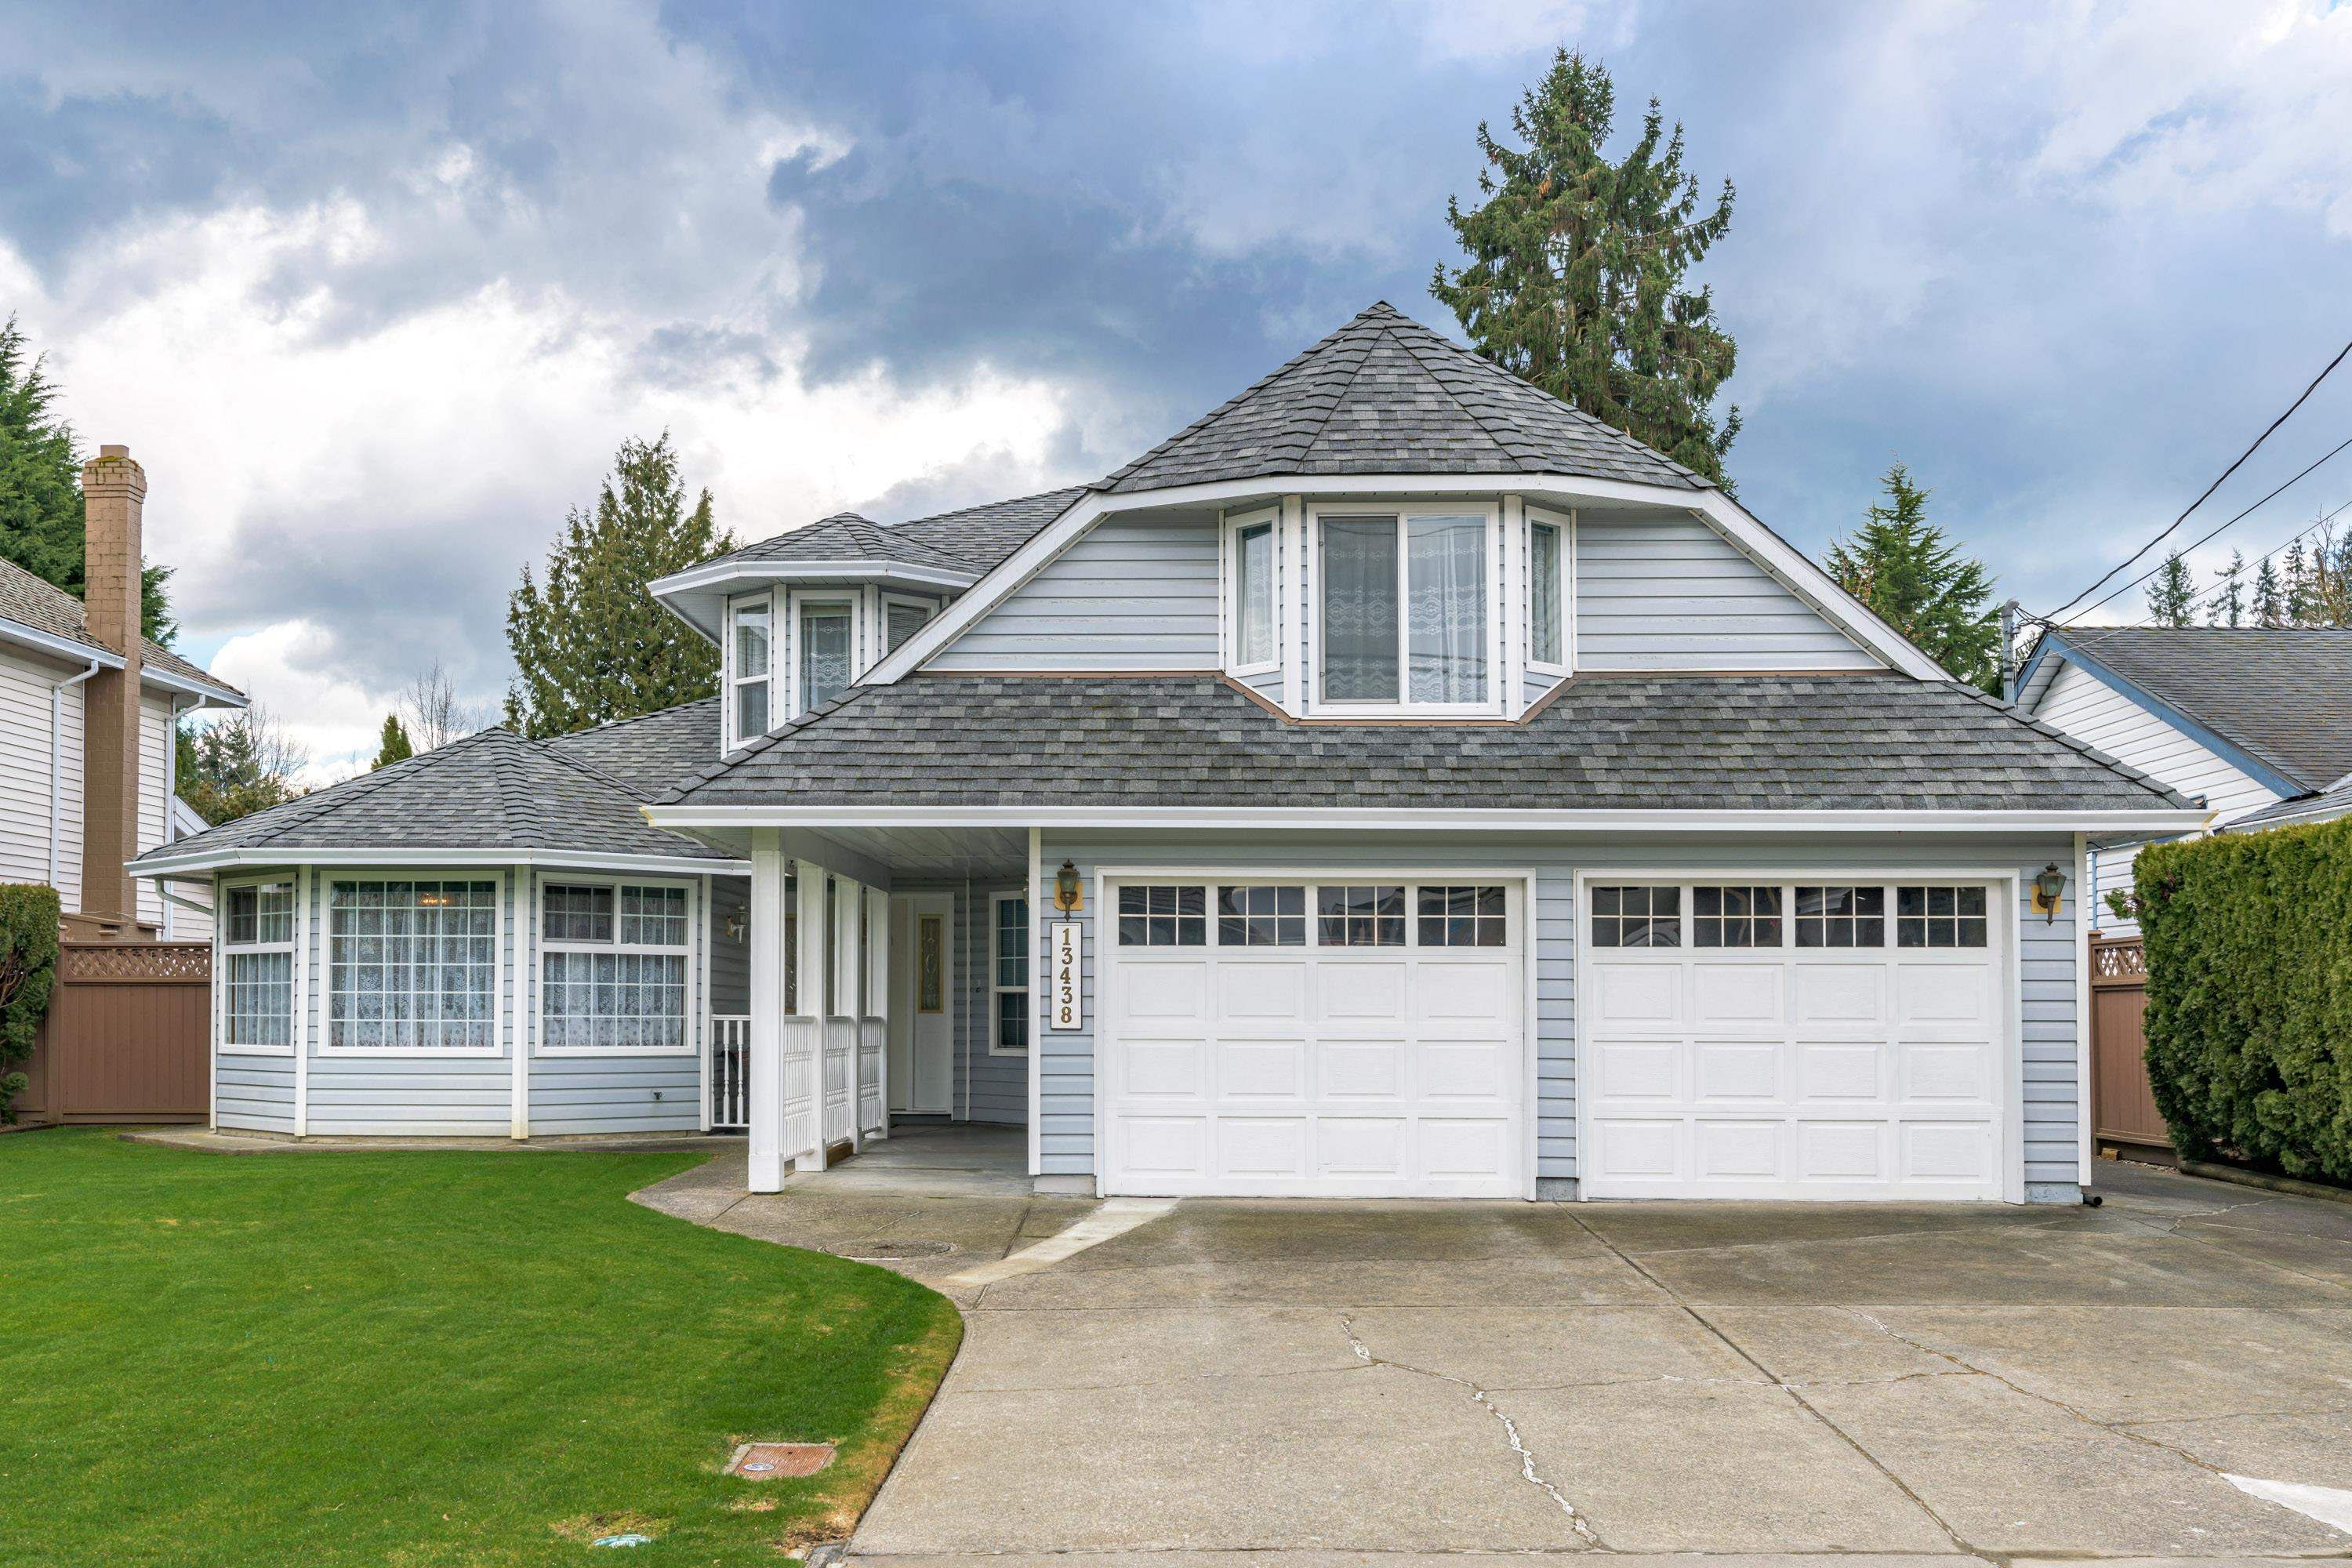 I have sold a property at 13438 60 AVE in Surrey
